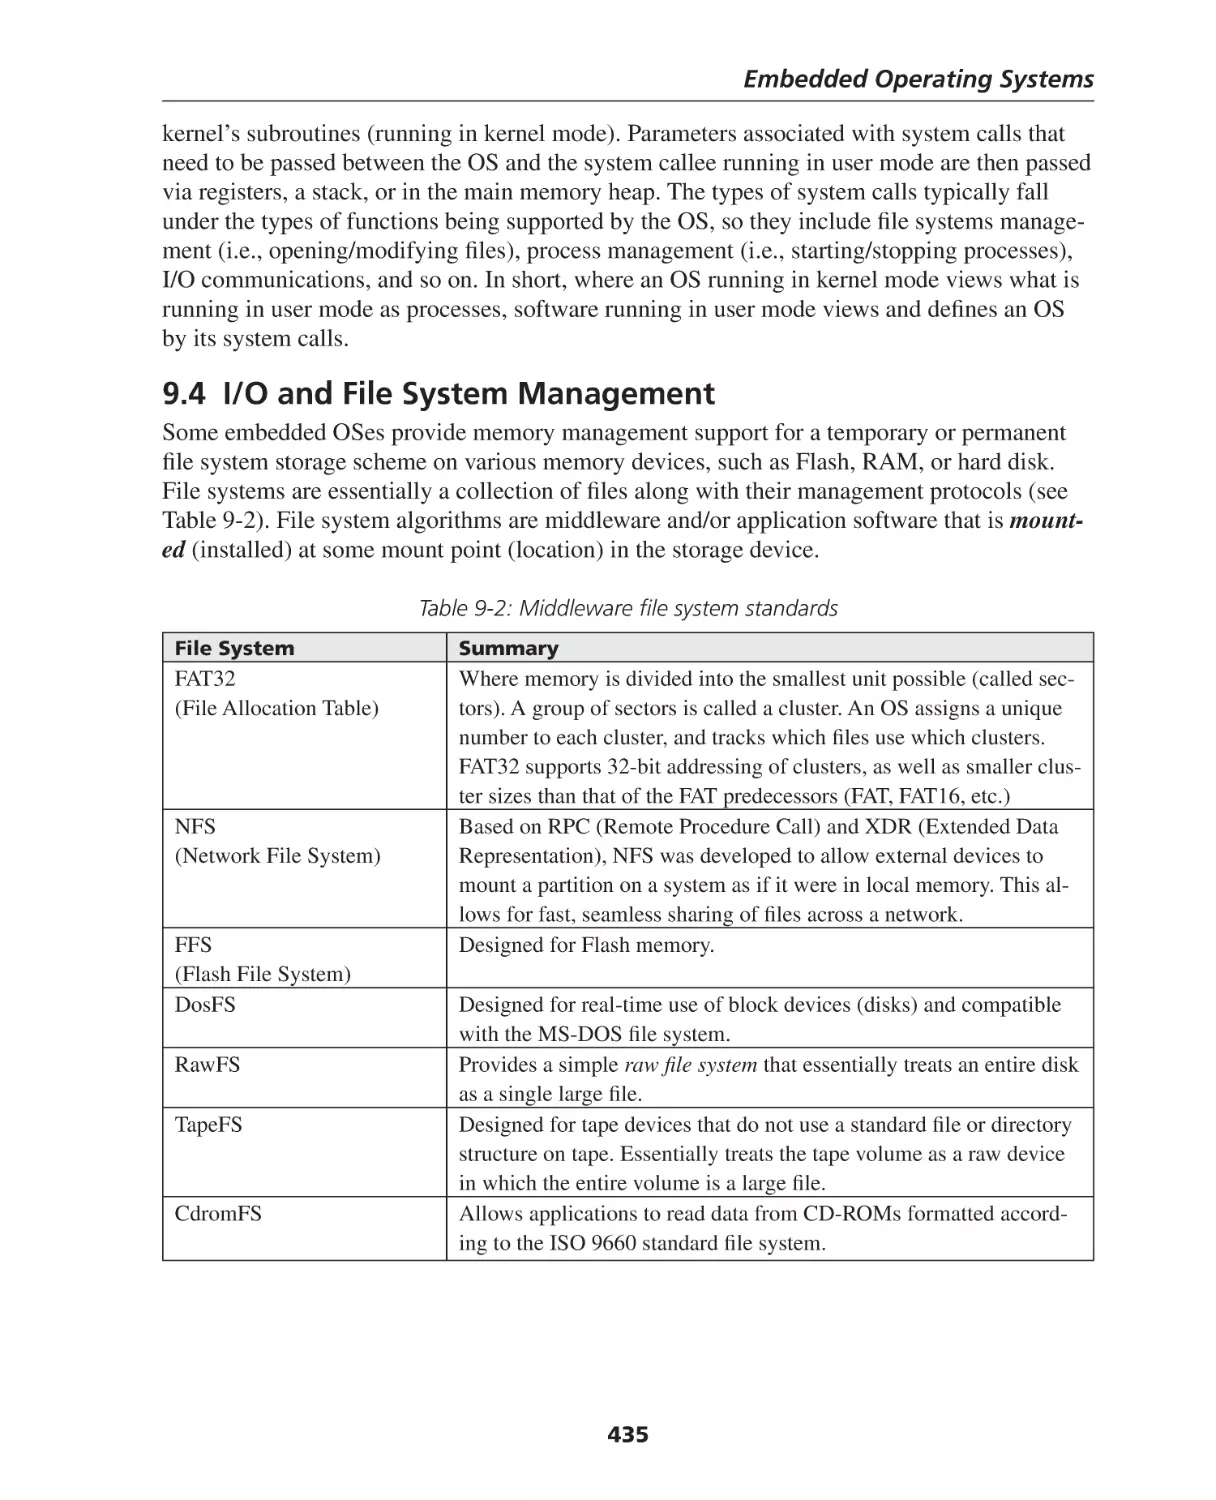 9.4 I/O and File System Management